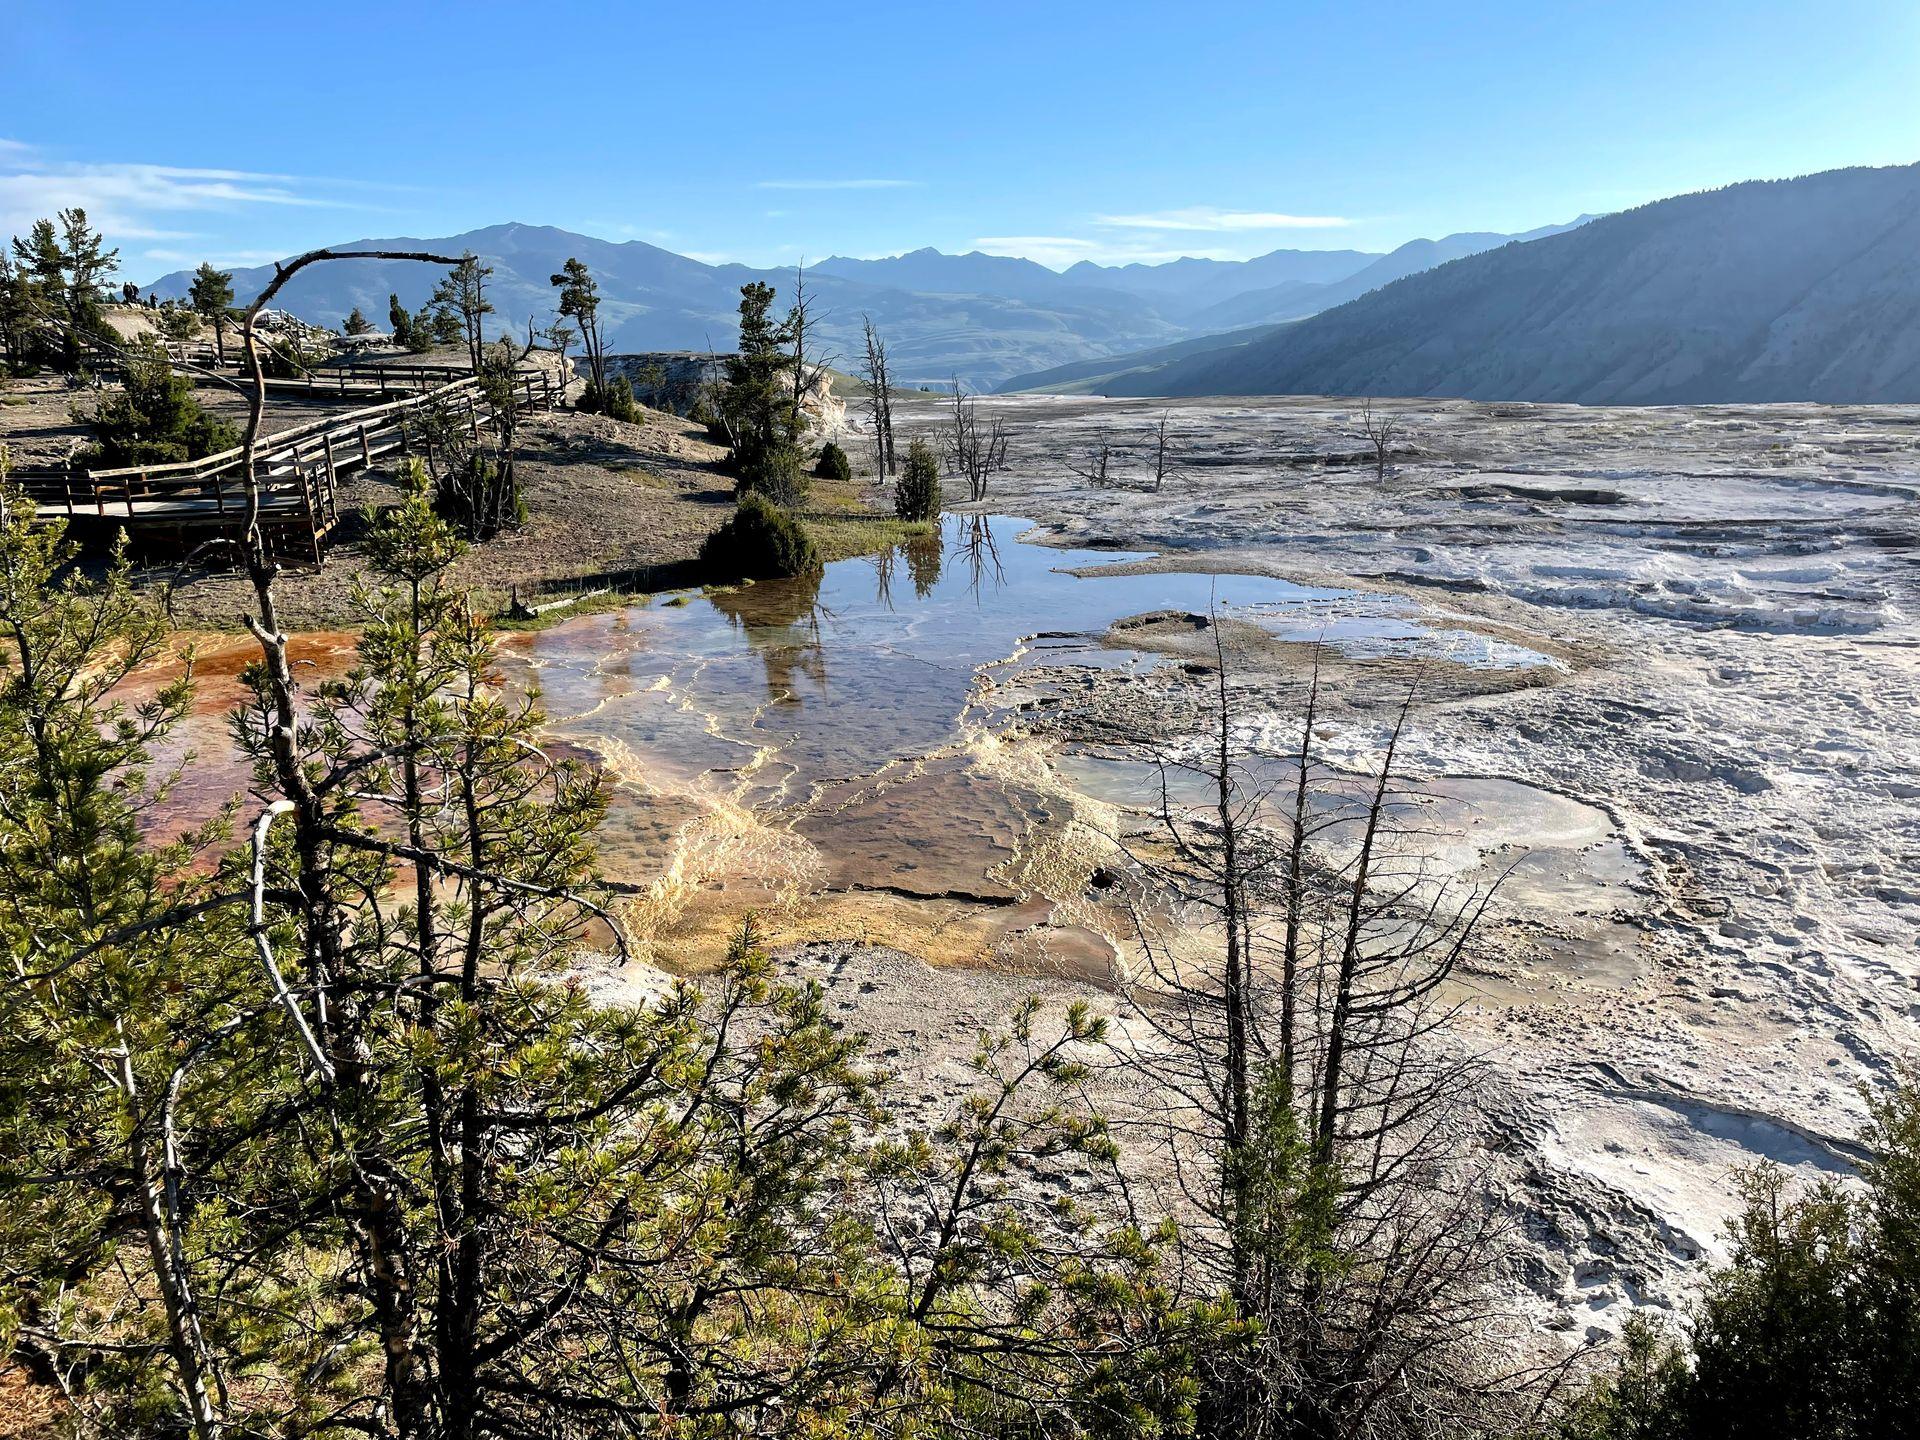 A view of sulphur rocks and blue water from the Upper Terrace of Mammoth Hot Springs.